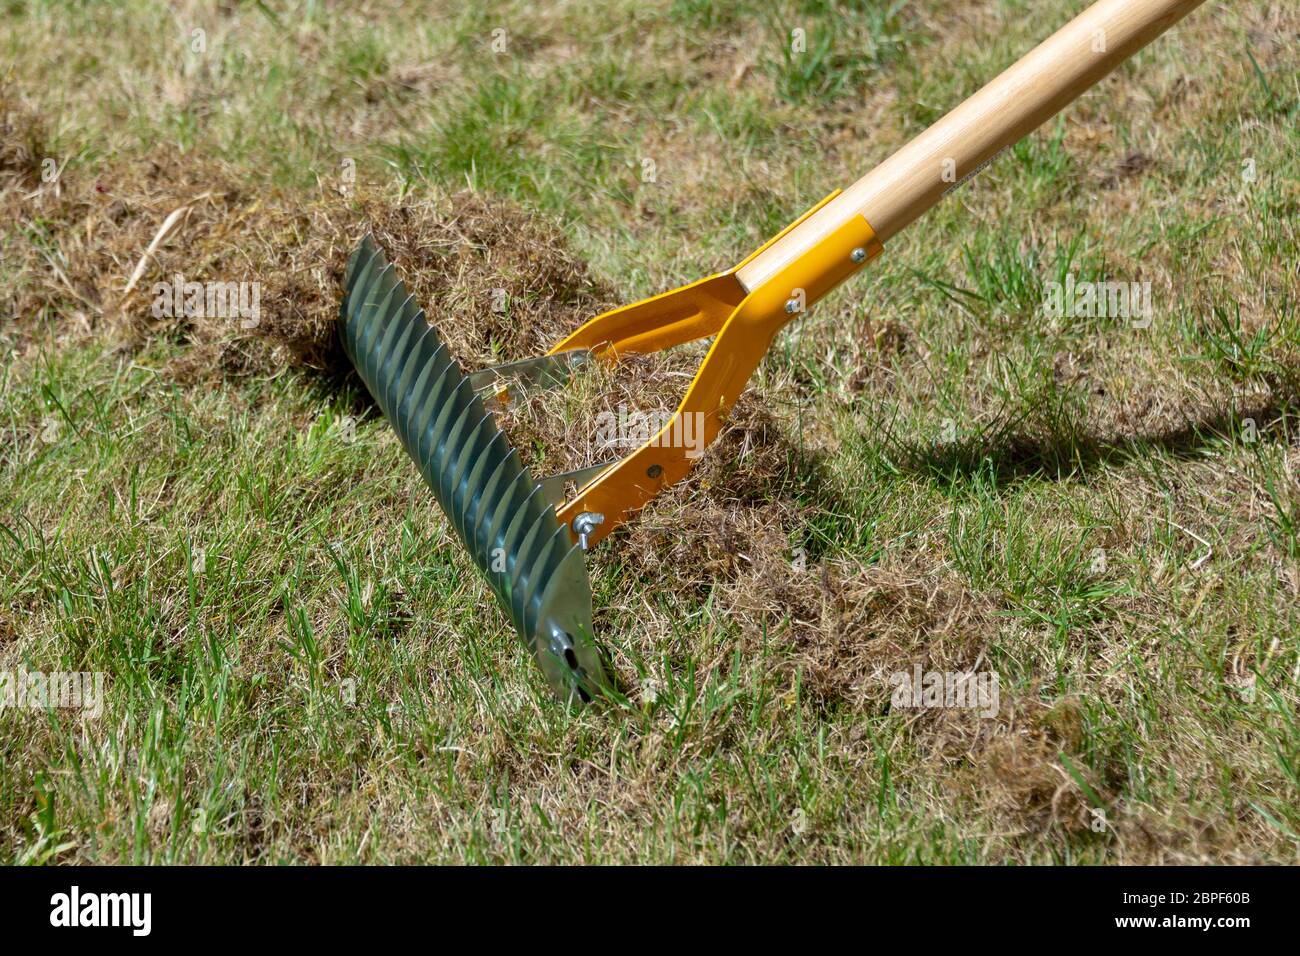 Close up on manual lawn scarifier in a garden in spring Stock Photo